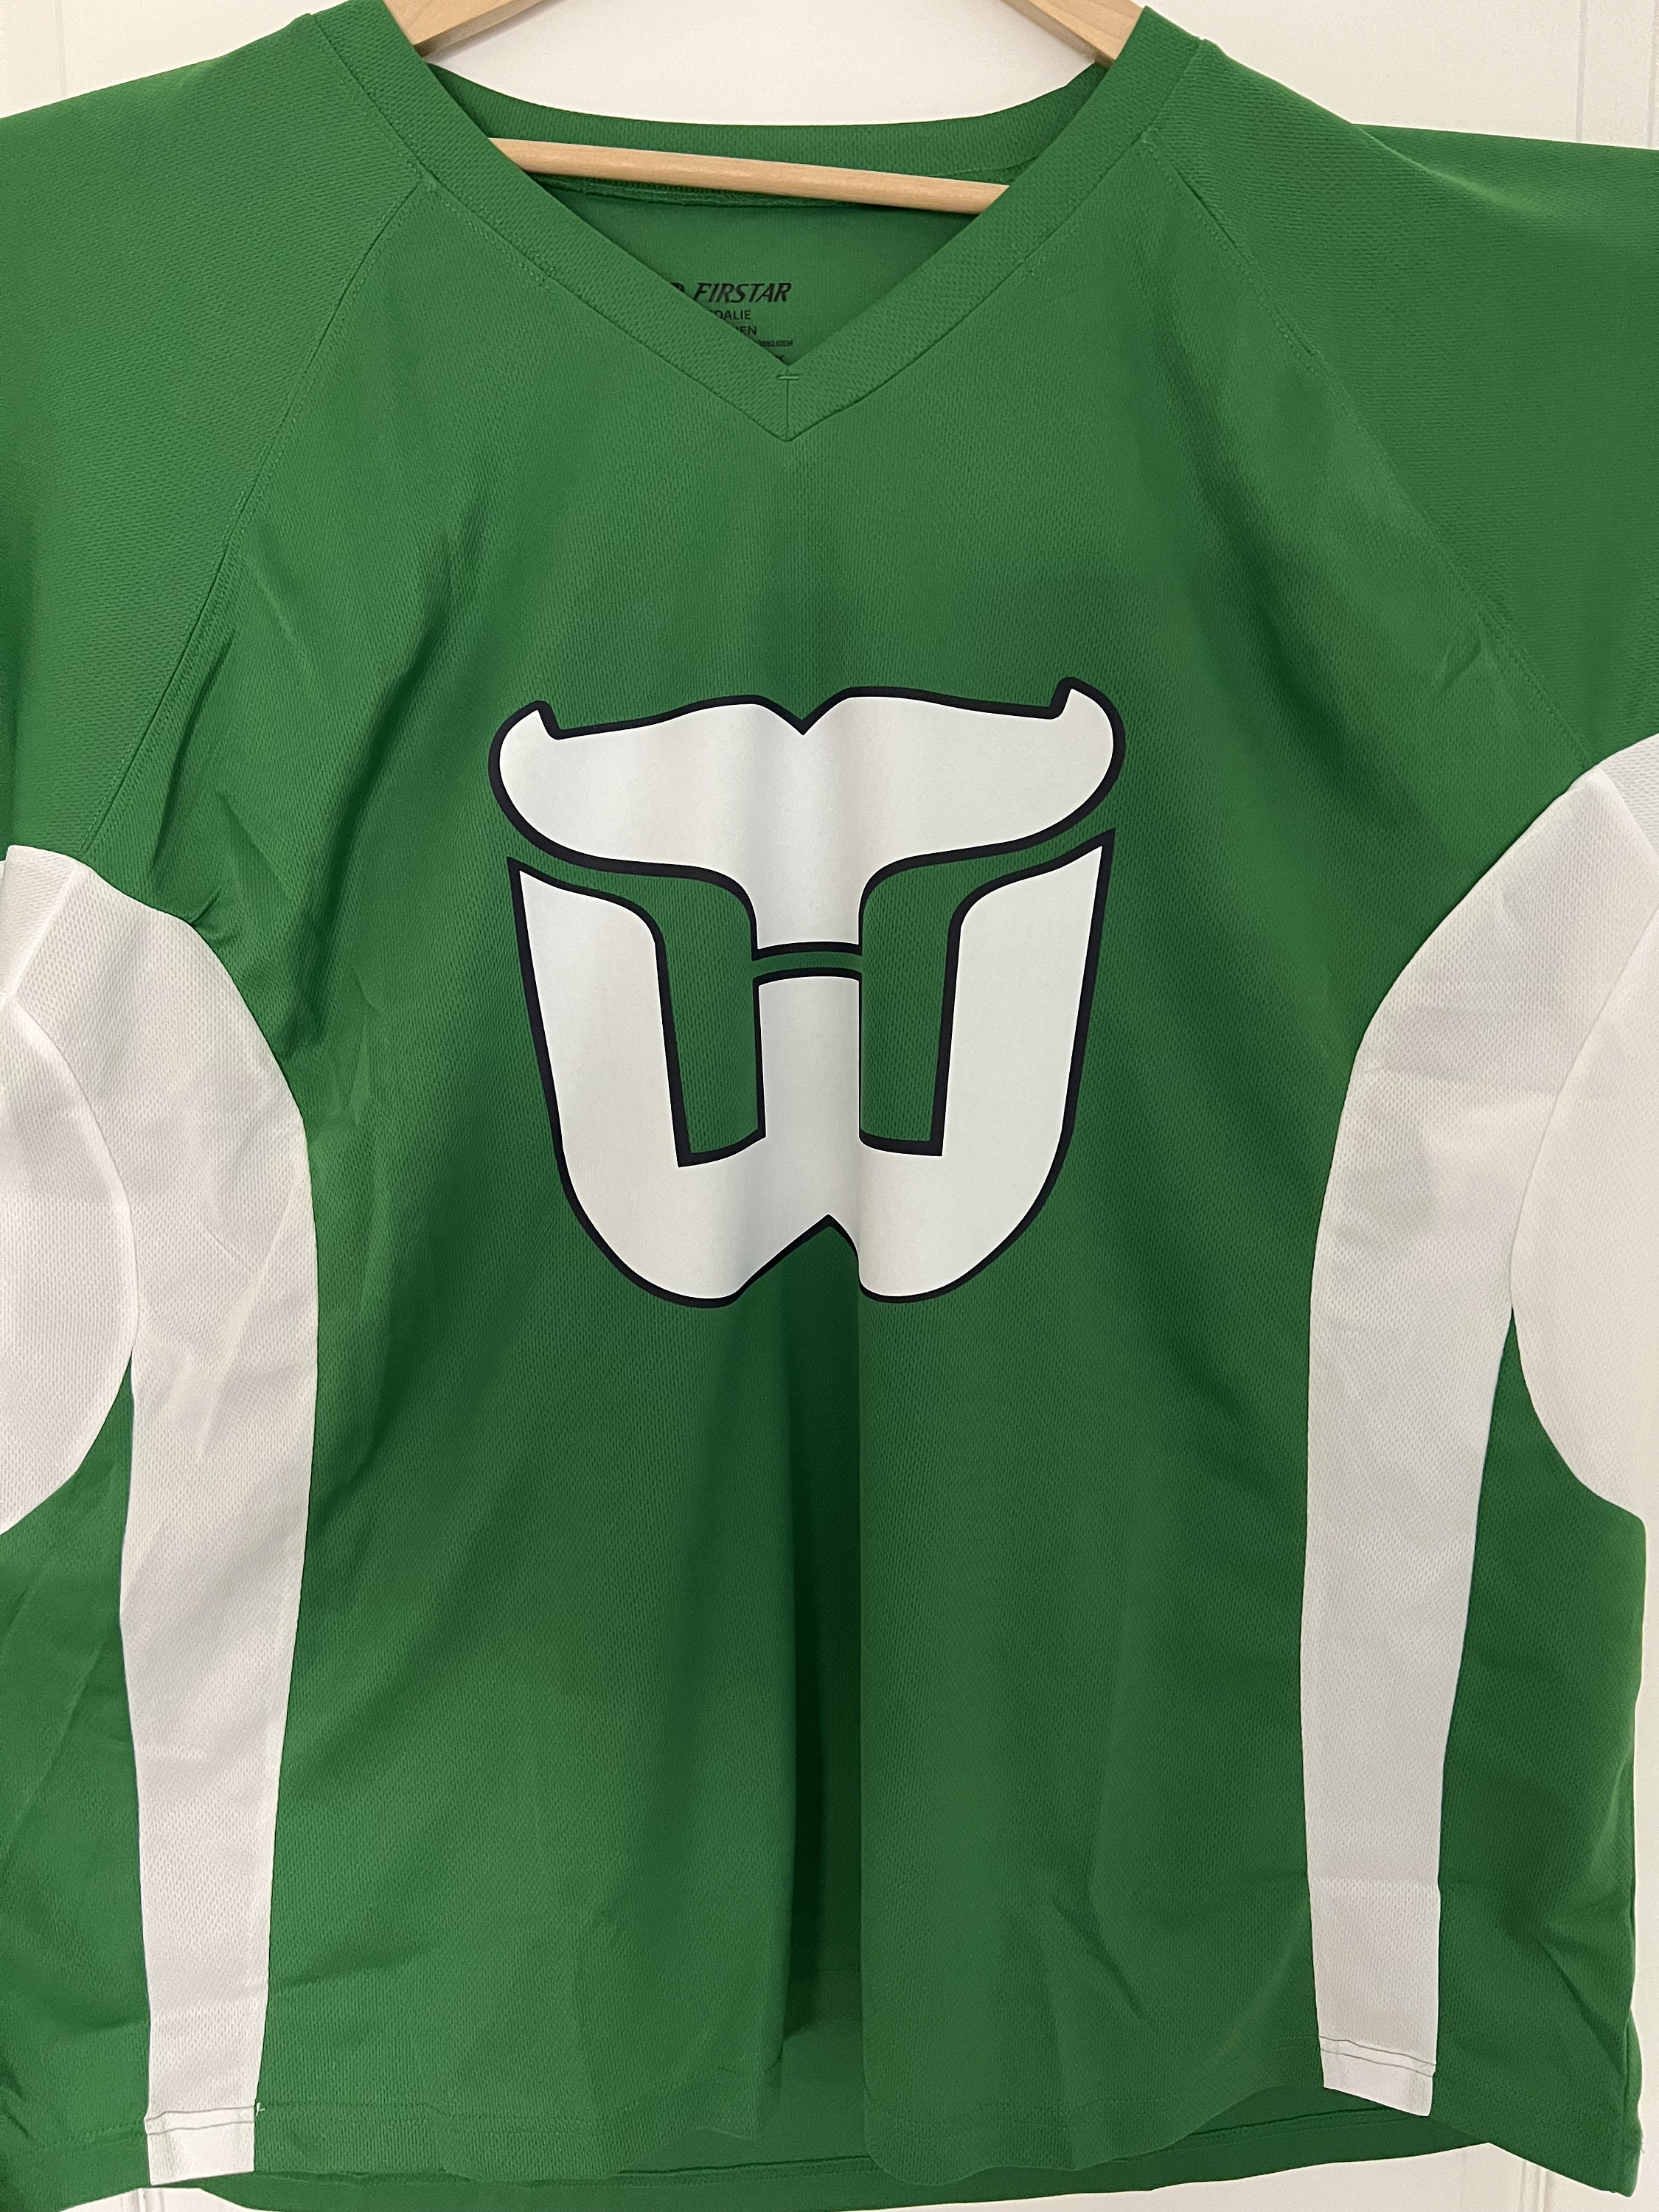 1992-1997 Size 44 Hartford Whalers Jersey90s Hartford Whalers 